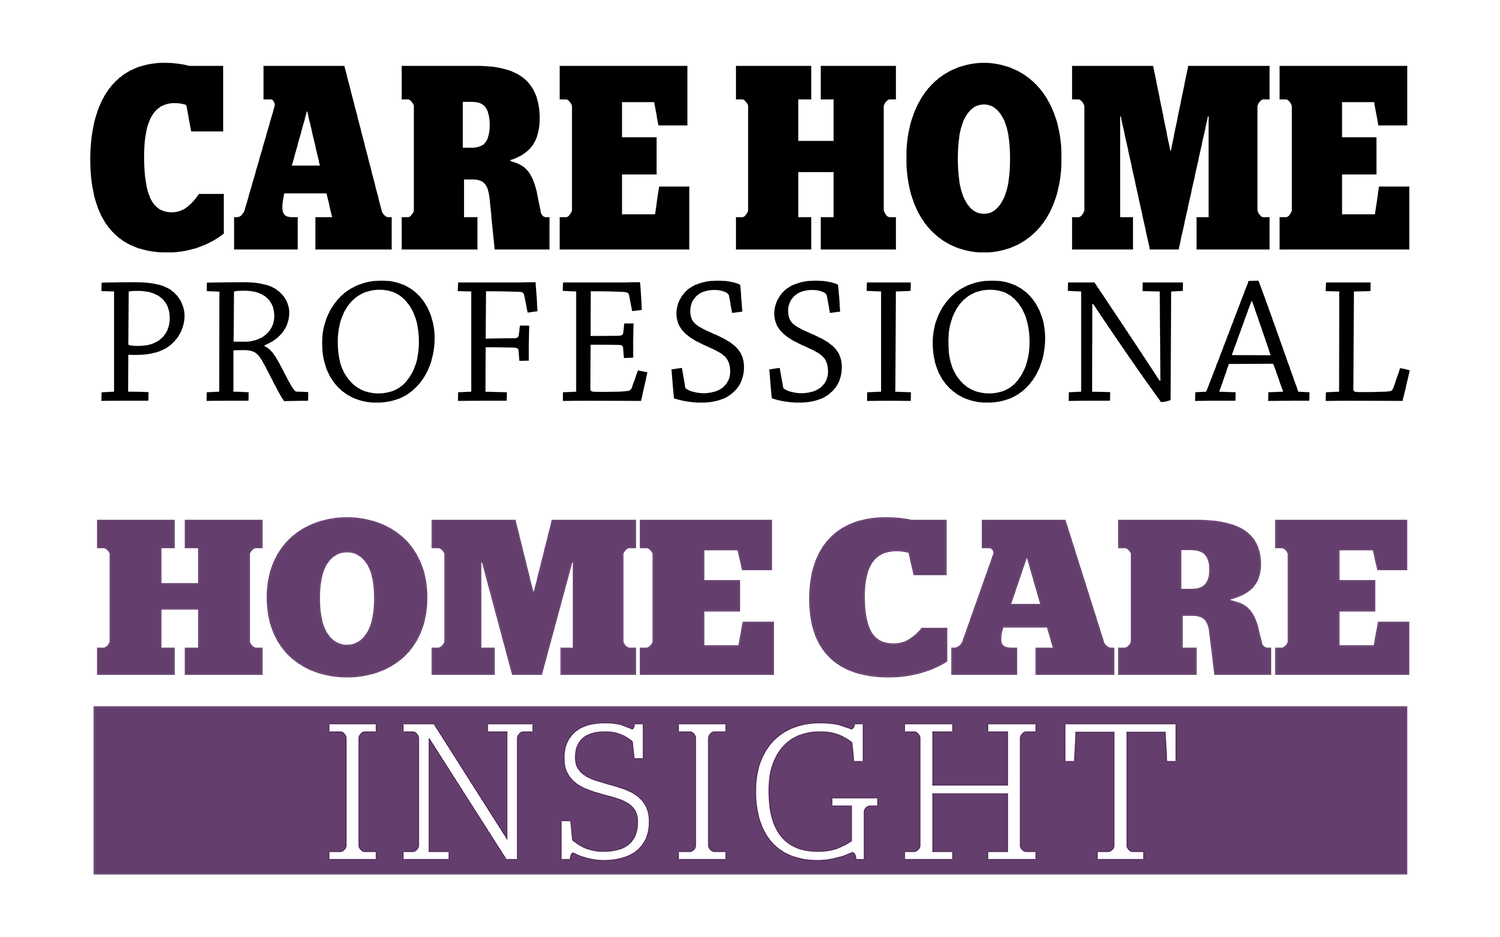 Care Home Professional and Home Care Insight